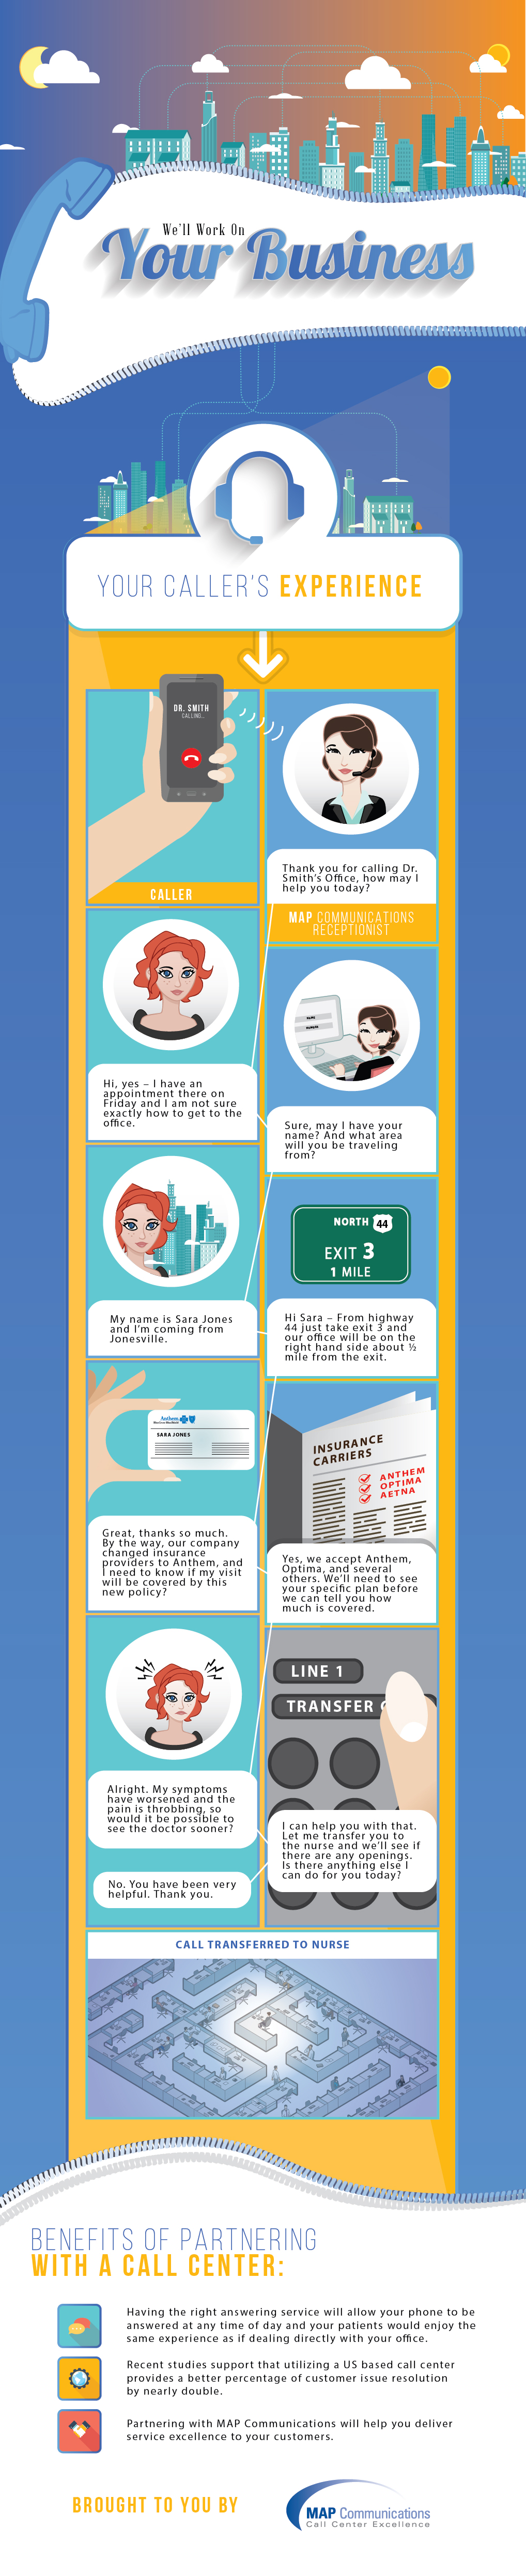 Call Center Experience Infographic